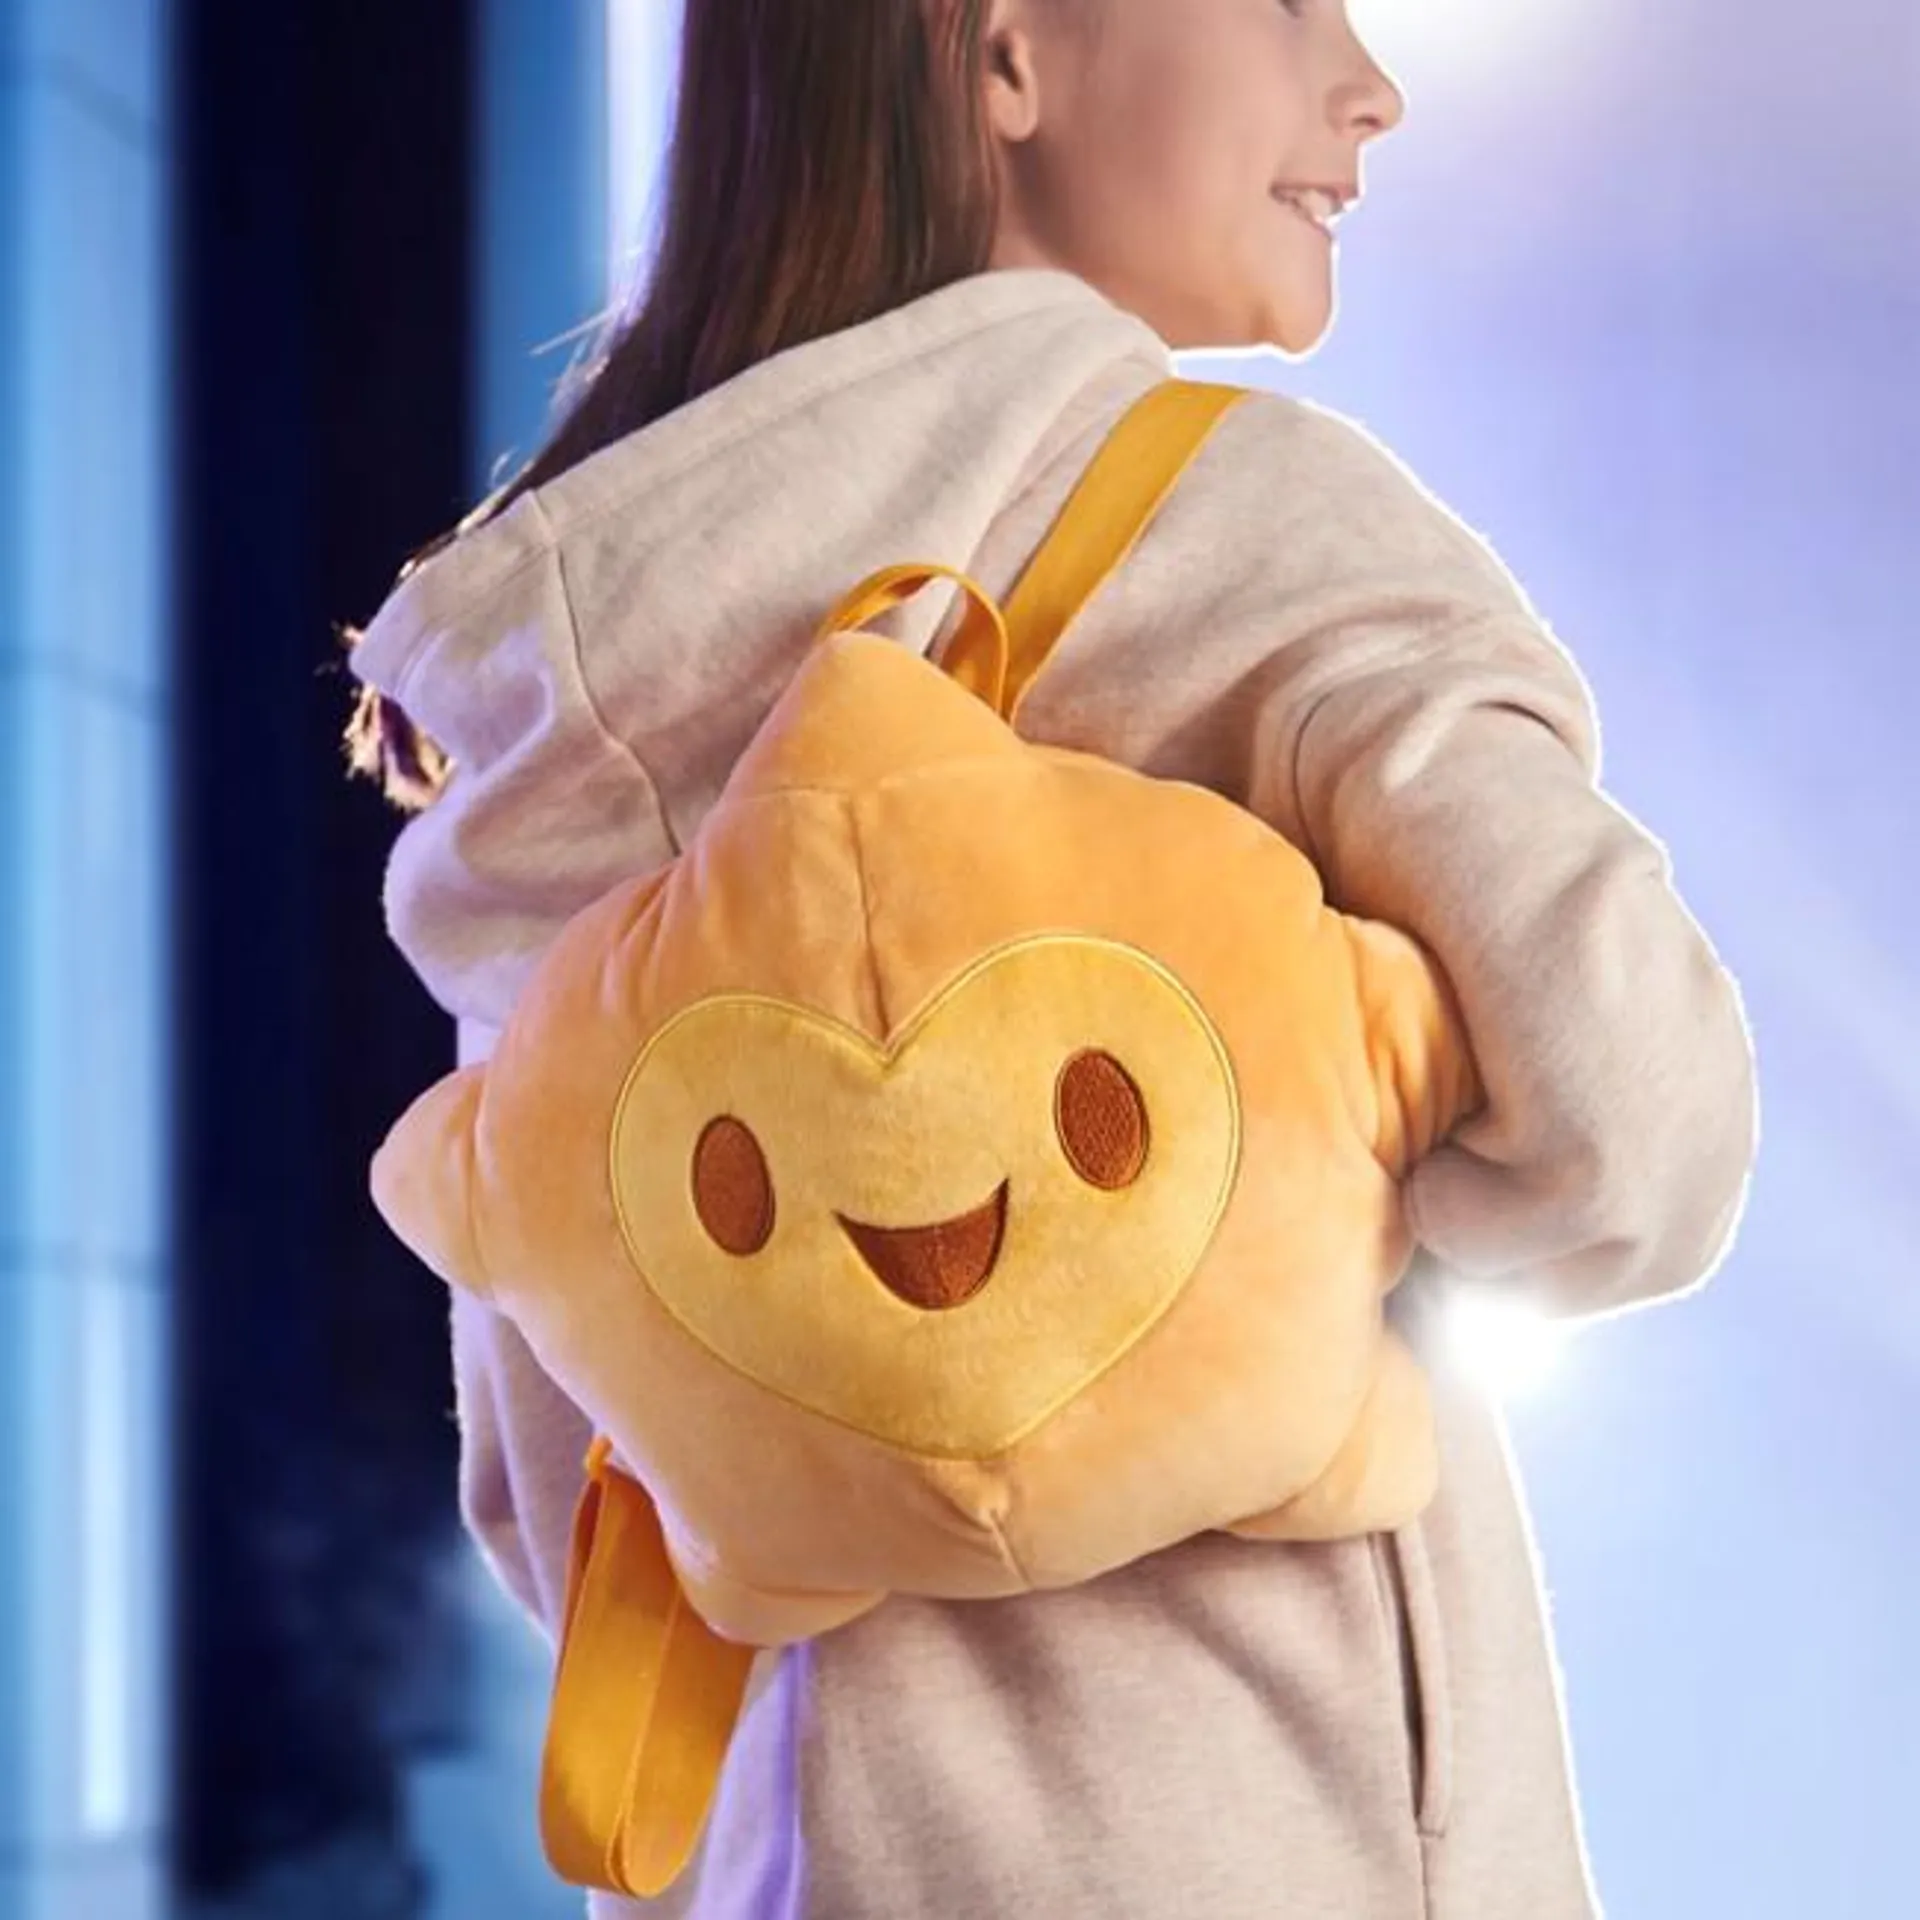 Star Soft Toy Backpack For Kids, Wish